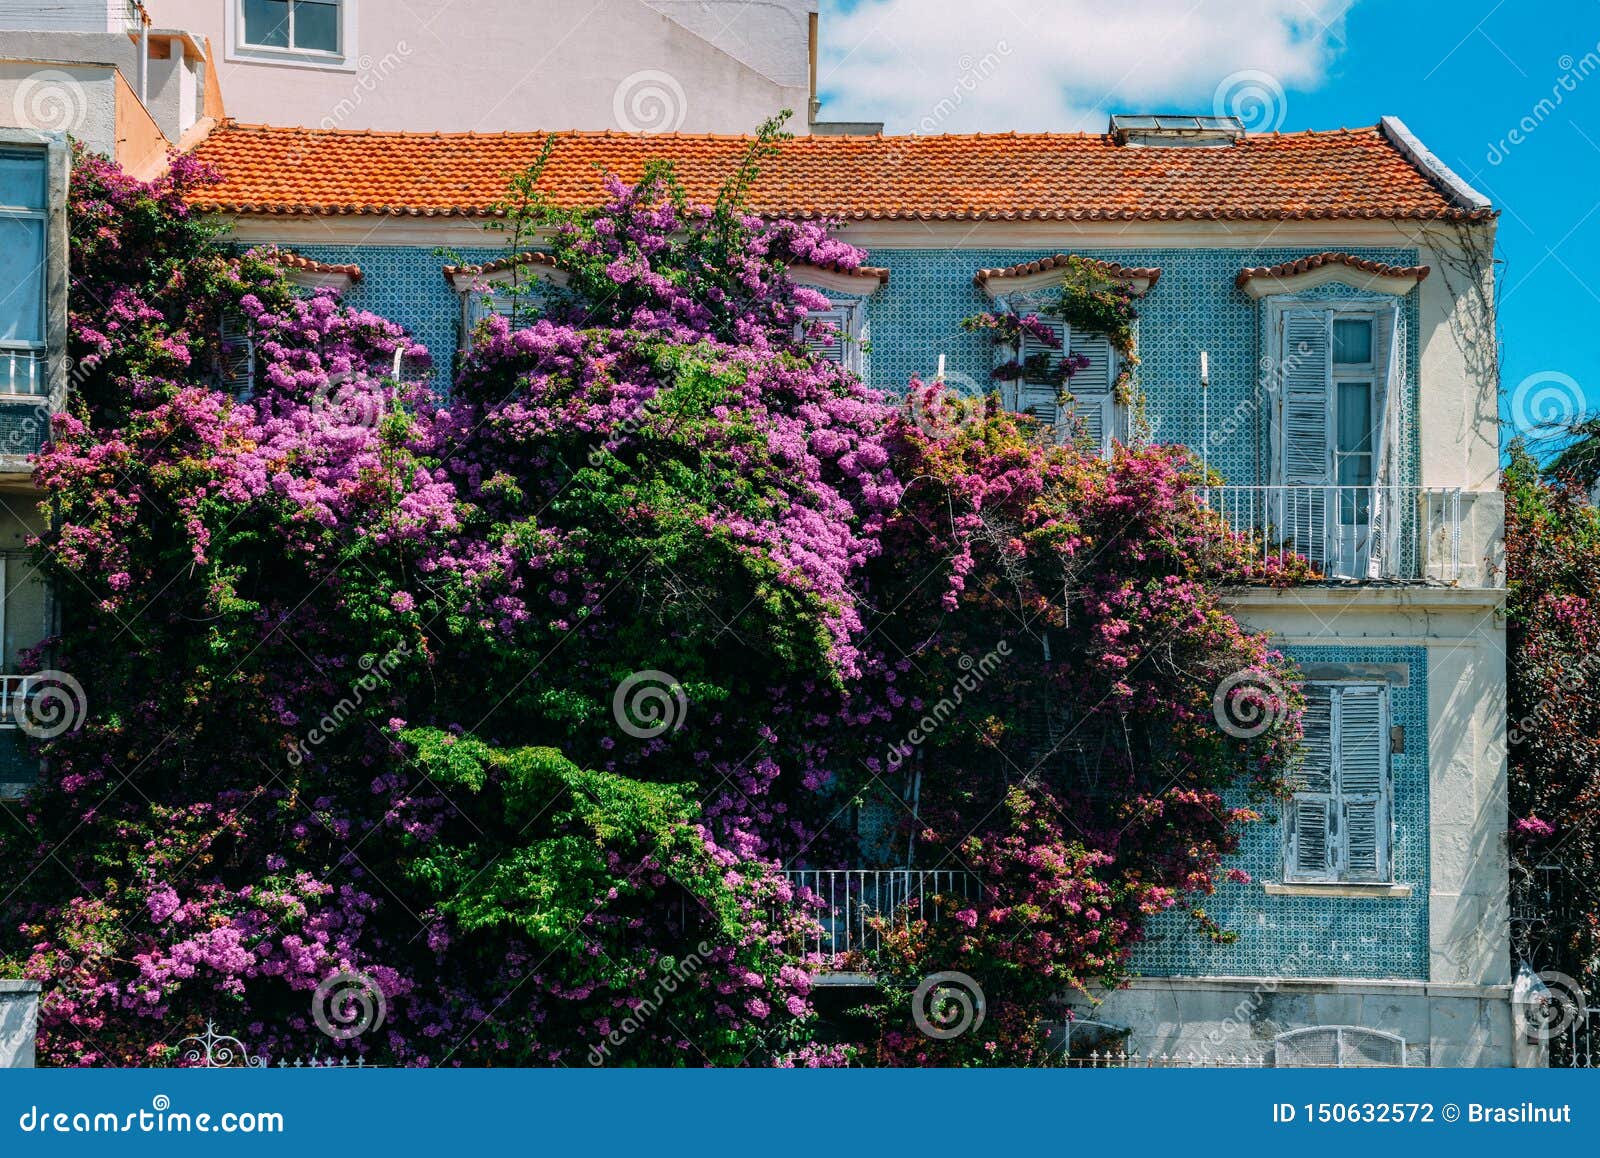 Purple Bougainvillea Flowers On The Balcony Of An Old Lisbon Apartment Building Stock Photo Image Of Ceramic Charming 150632572